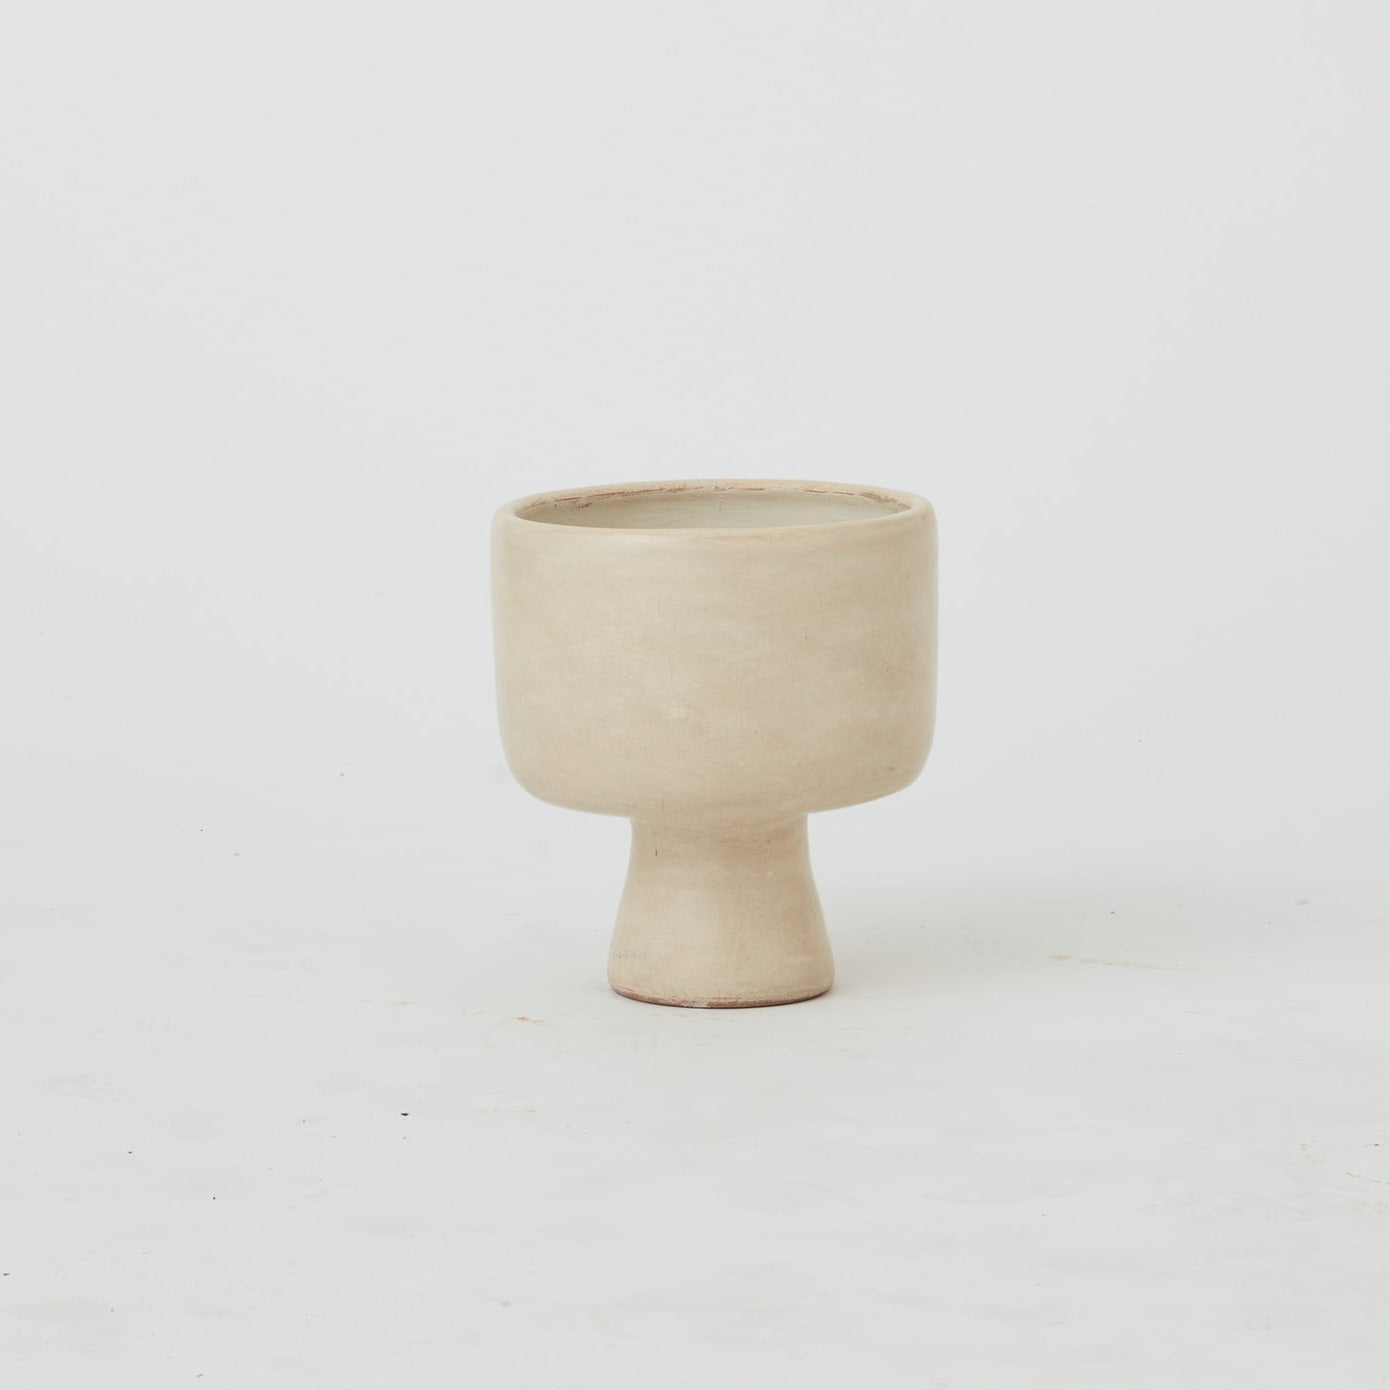 Small merino rendered offering bowl